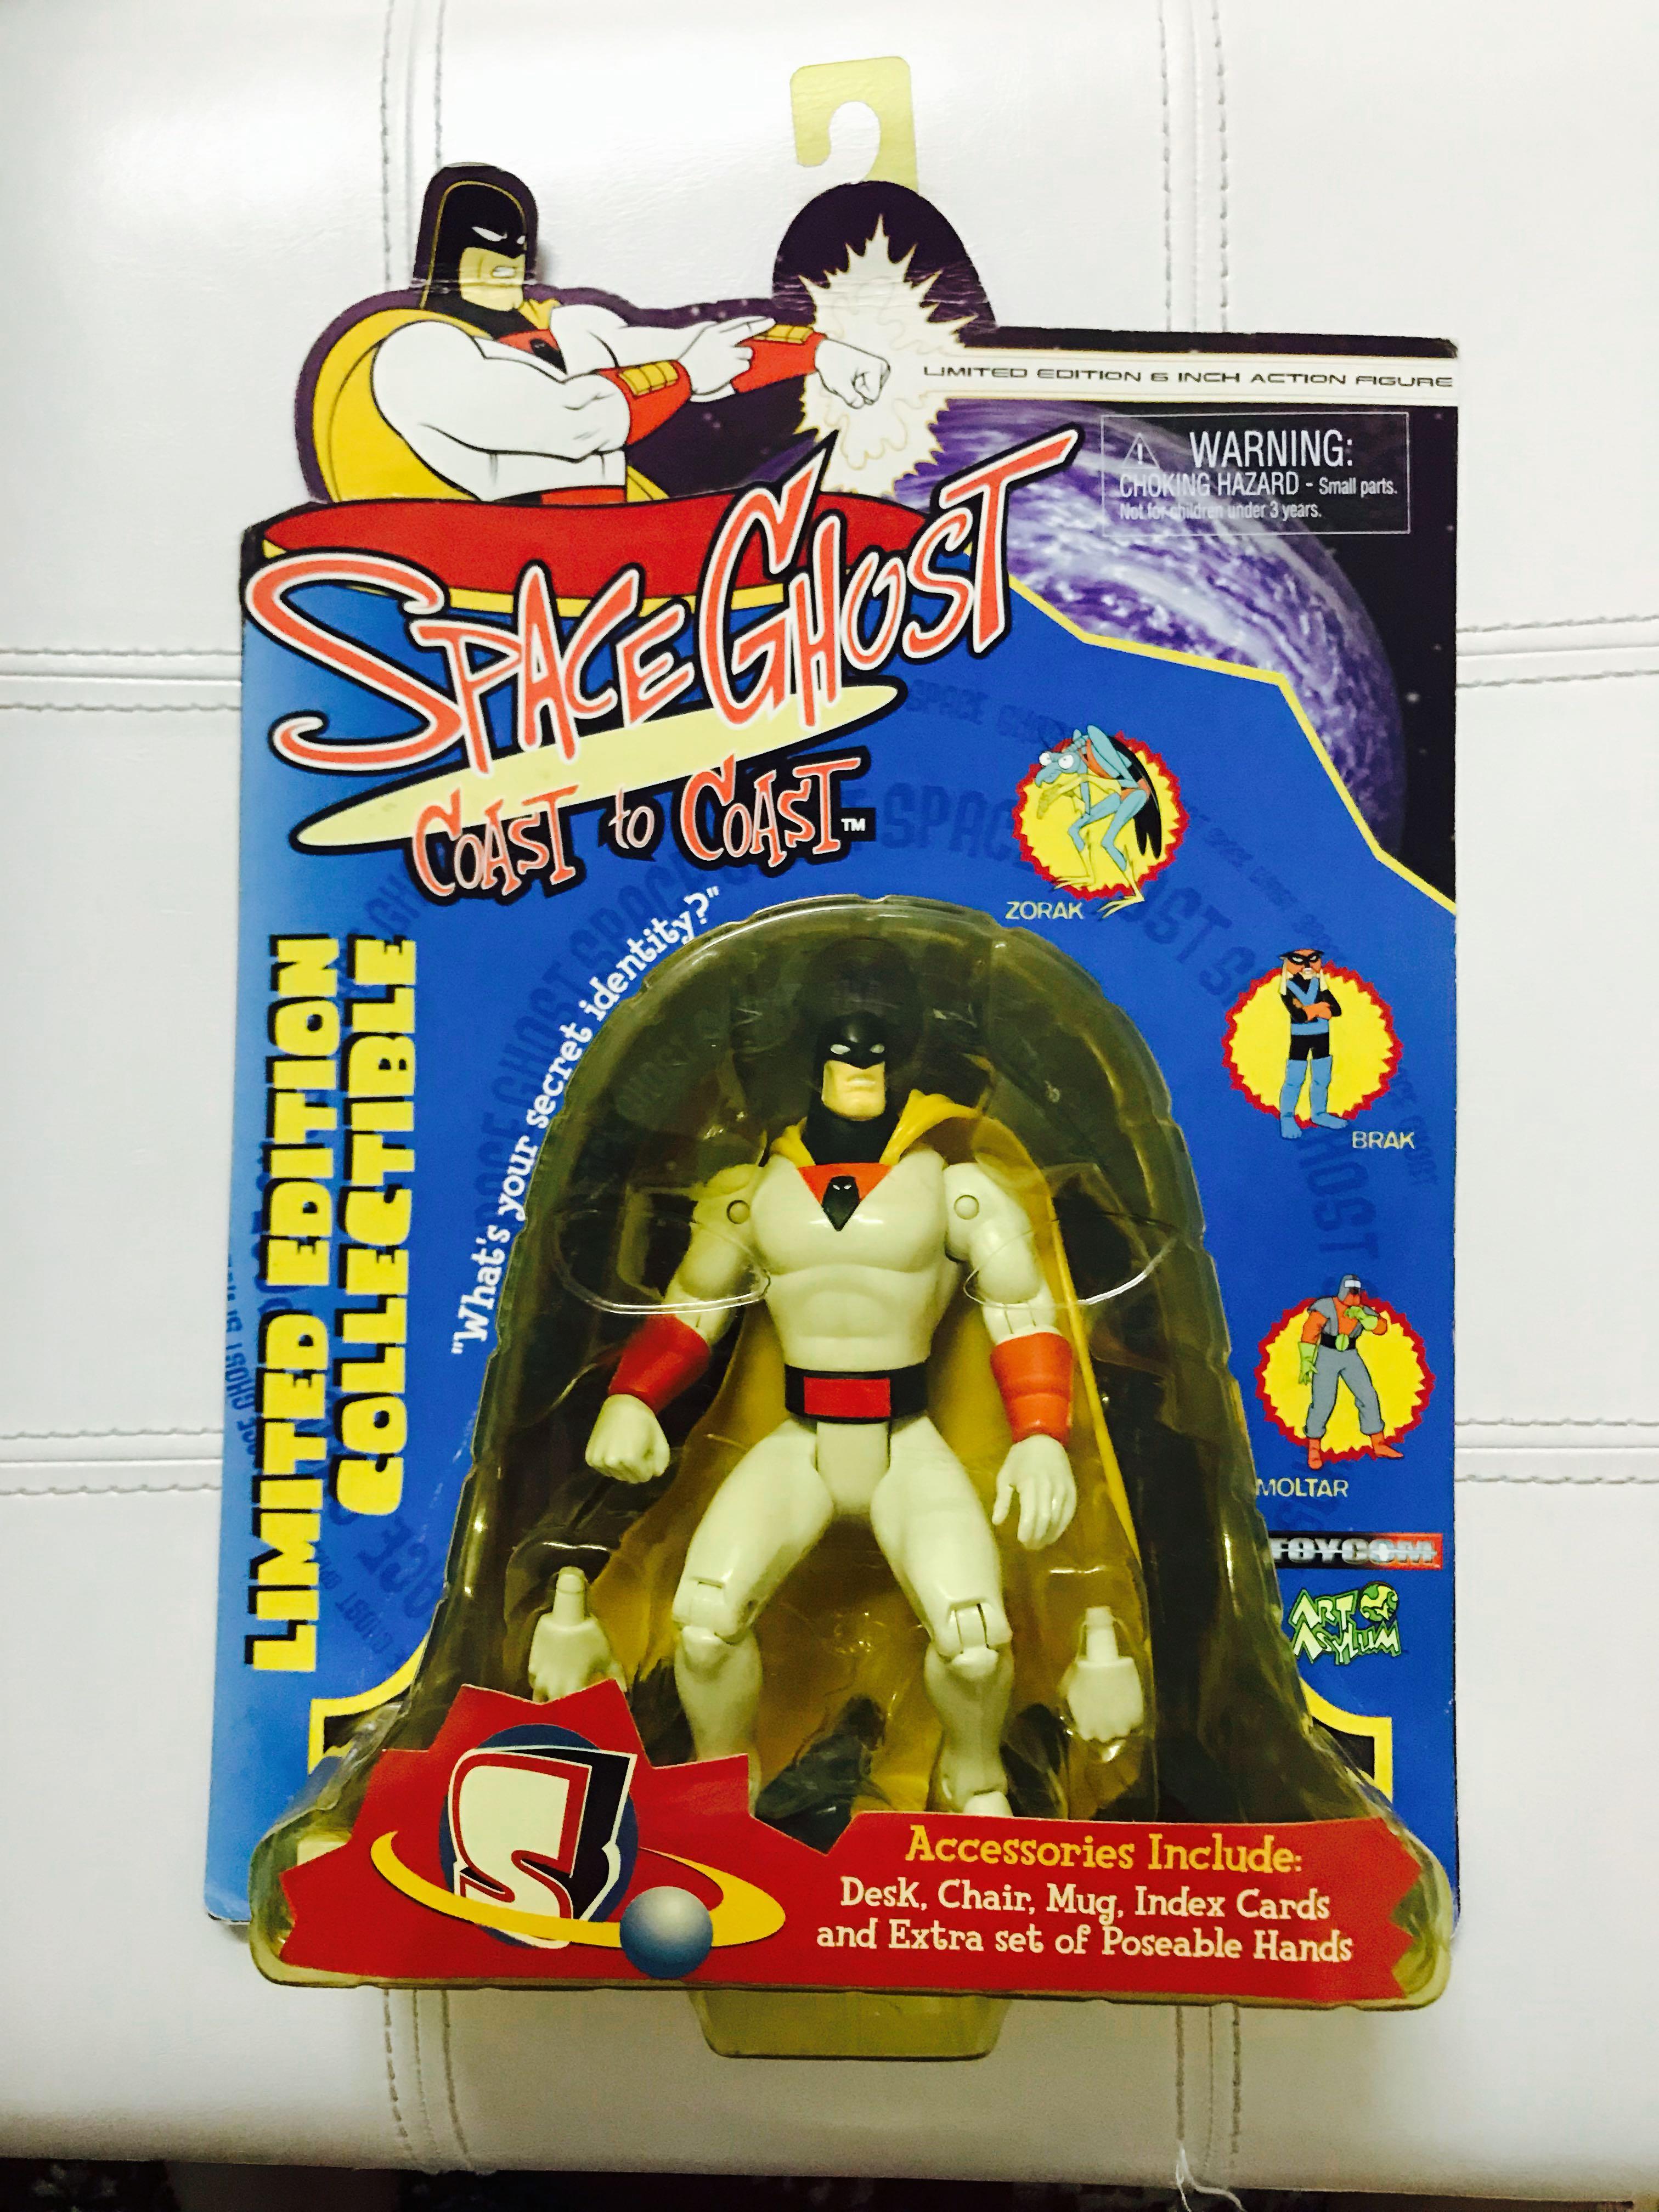 space ghost coast to coast action figure